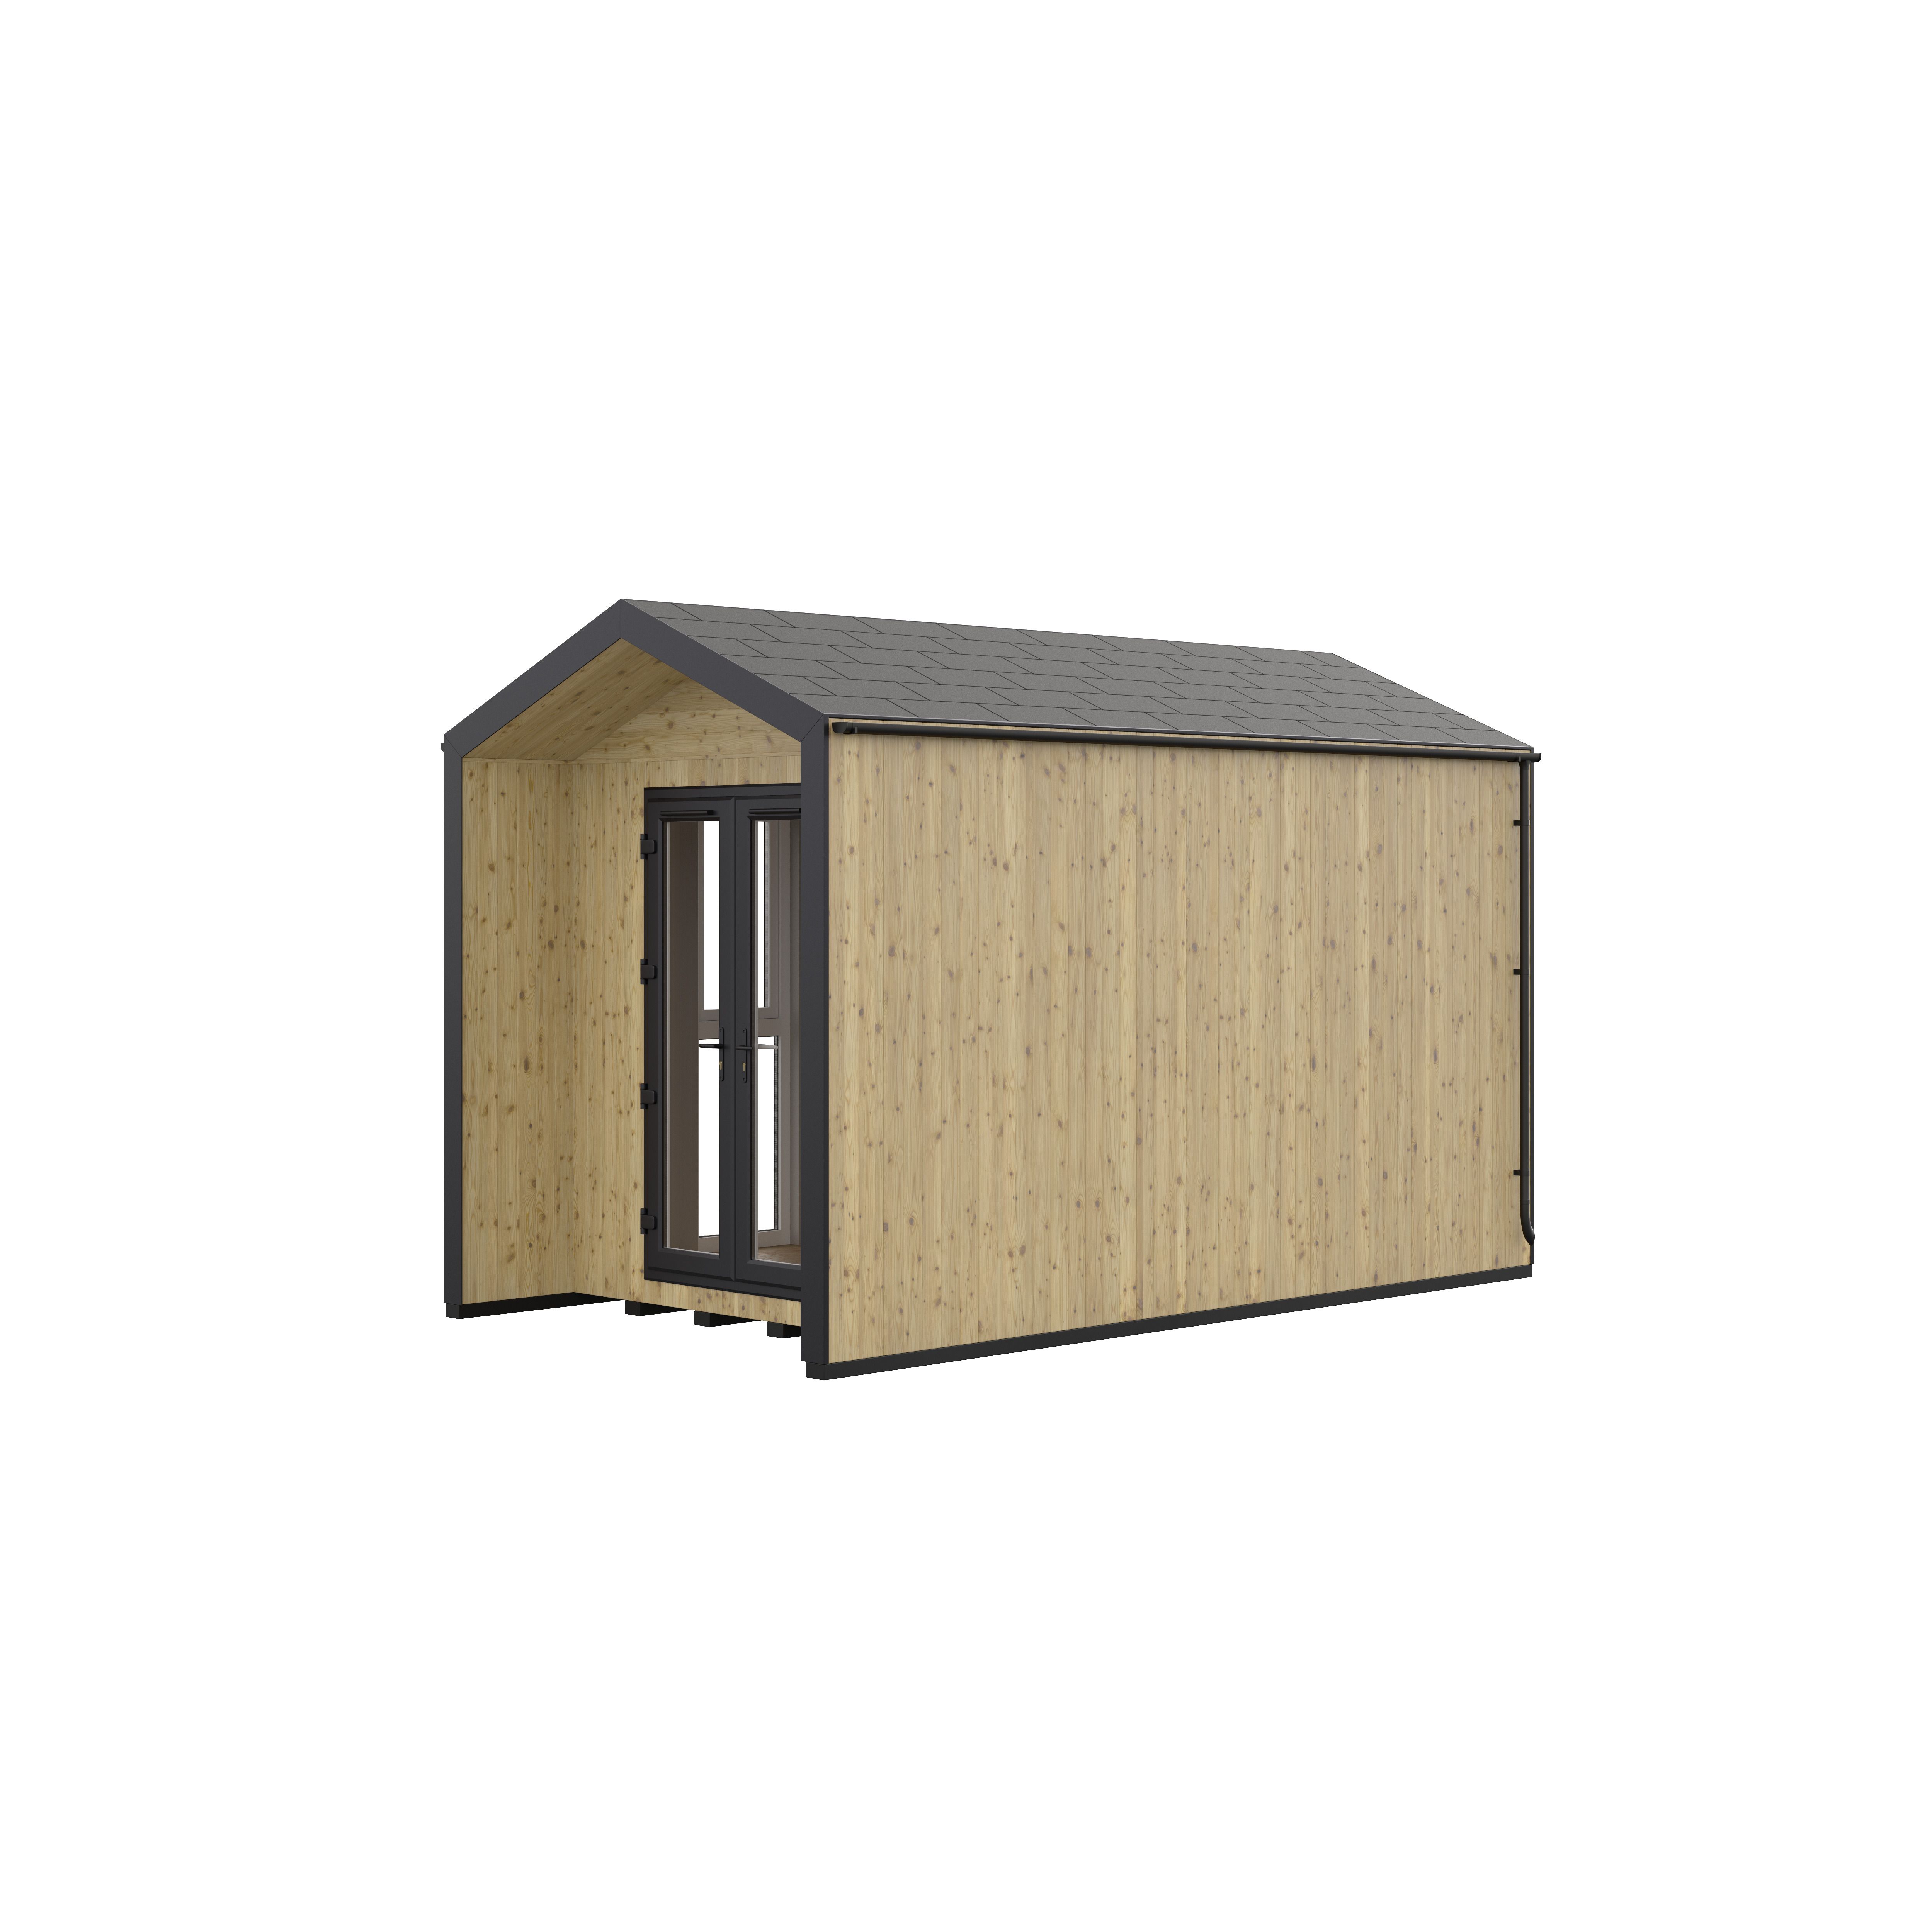 GoodHome Semora 8x14 ft with Double door Pitch Garden room 2.4m x 4.4m (Base included) - Assembly service included